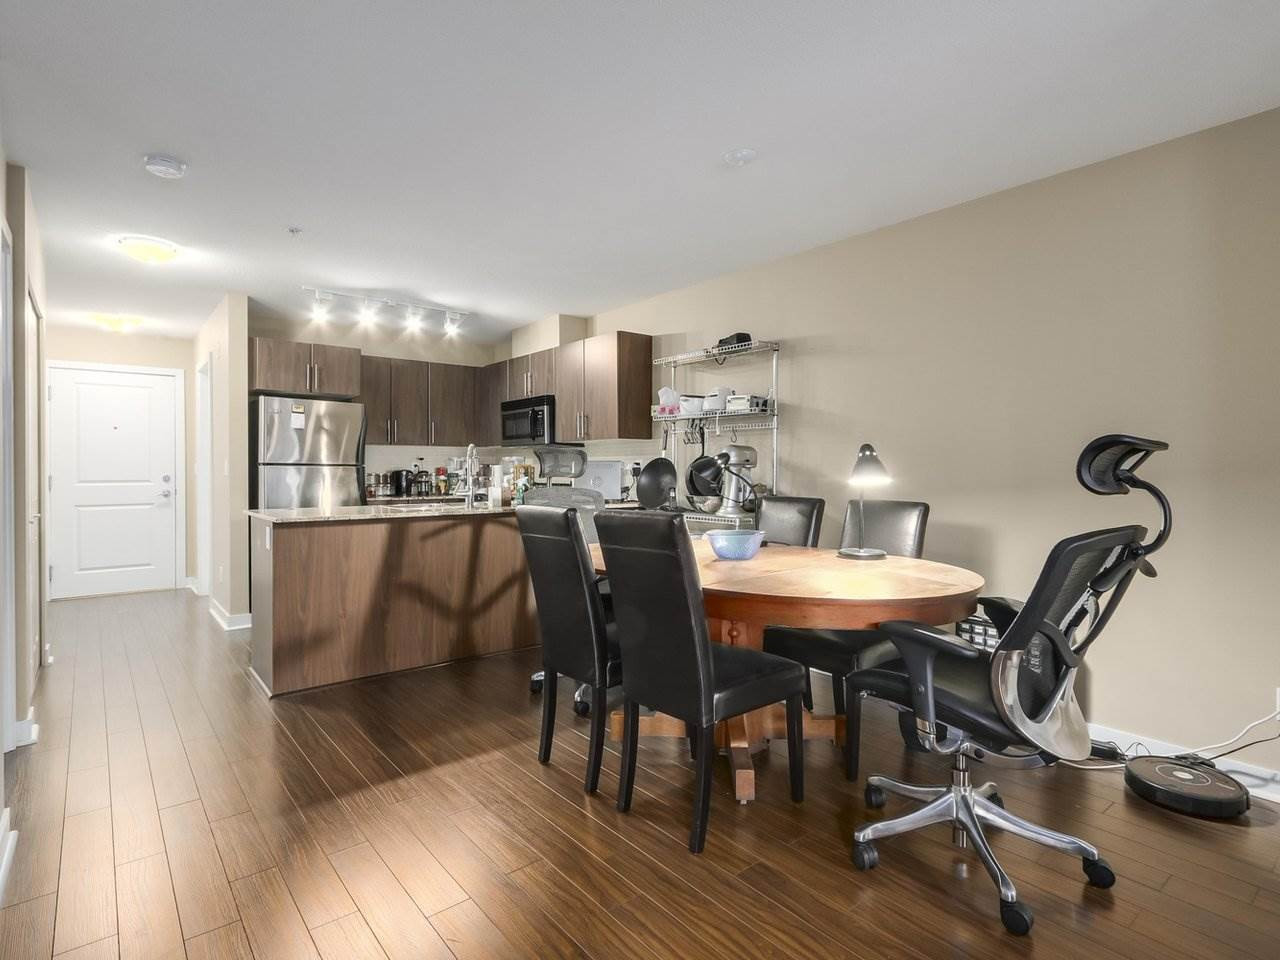 11 Fantastic Hardwood Flooring Langley Bc 2024 free download hardwood flooring langley bc of walnut grove condos for sale angela evennett real estate agent regarding a119 8929 202 street in langley walnut grove condo for sale in the grove mlsa r227733